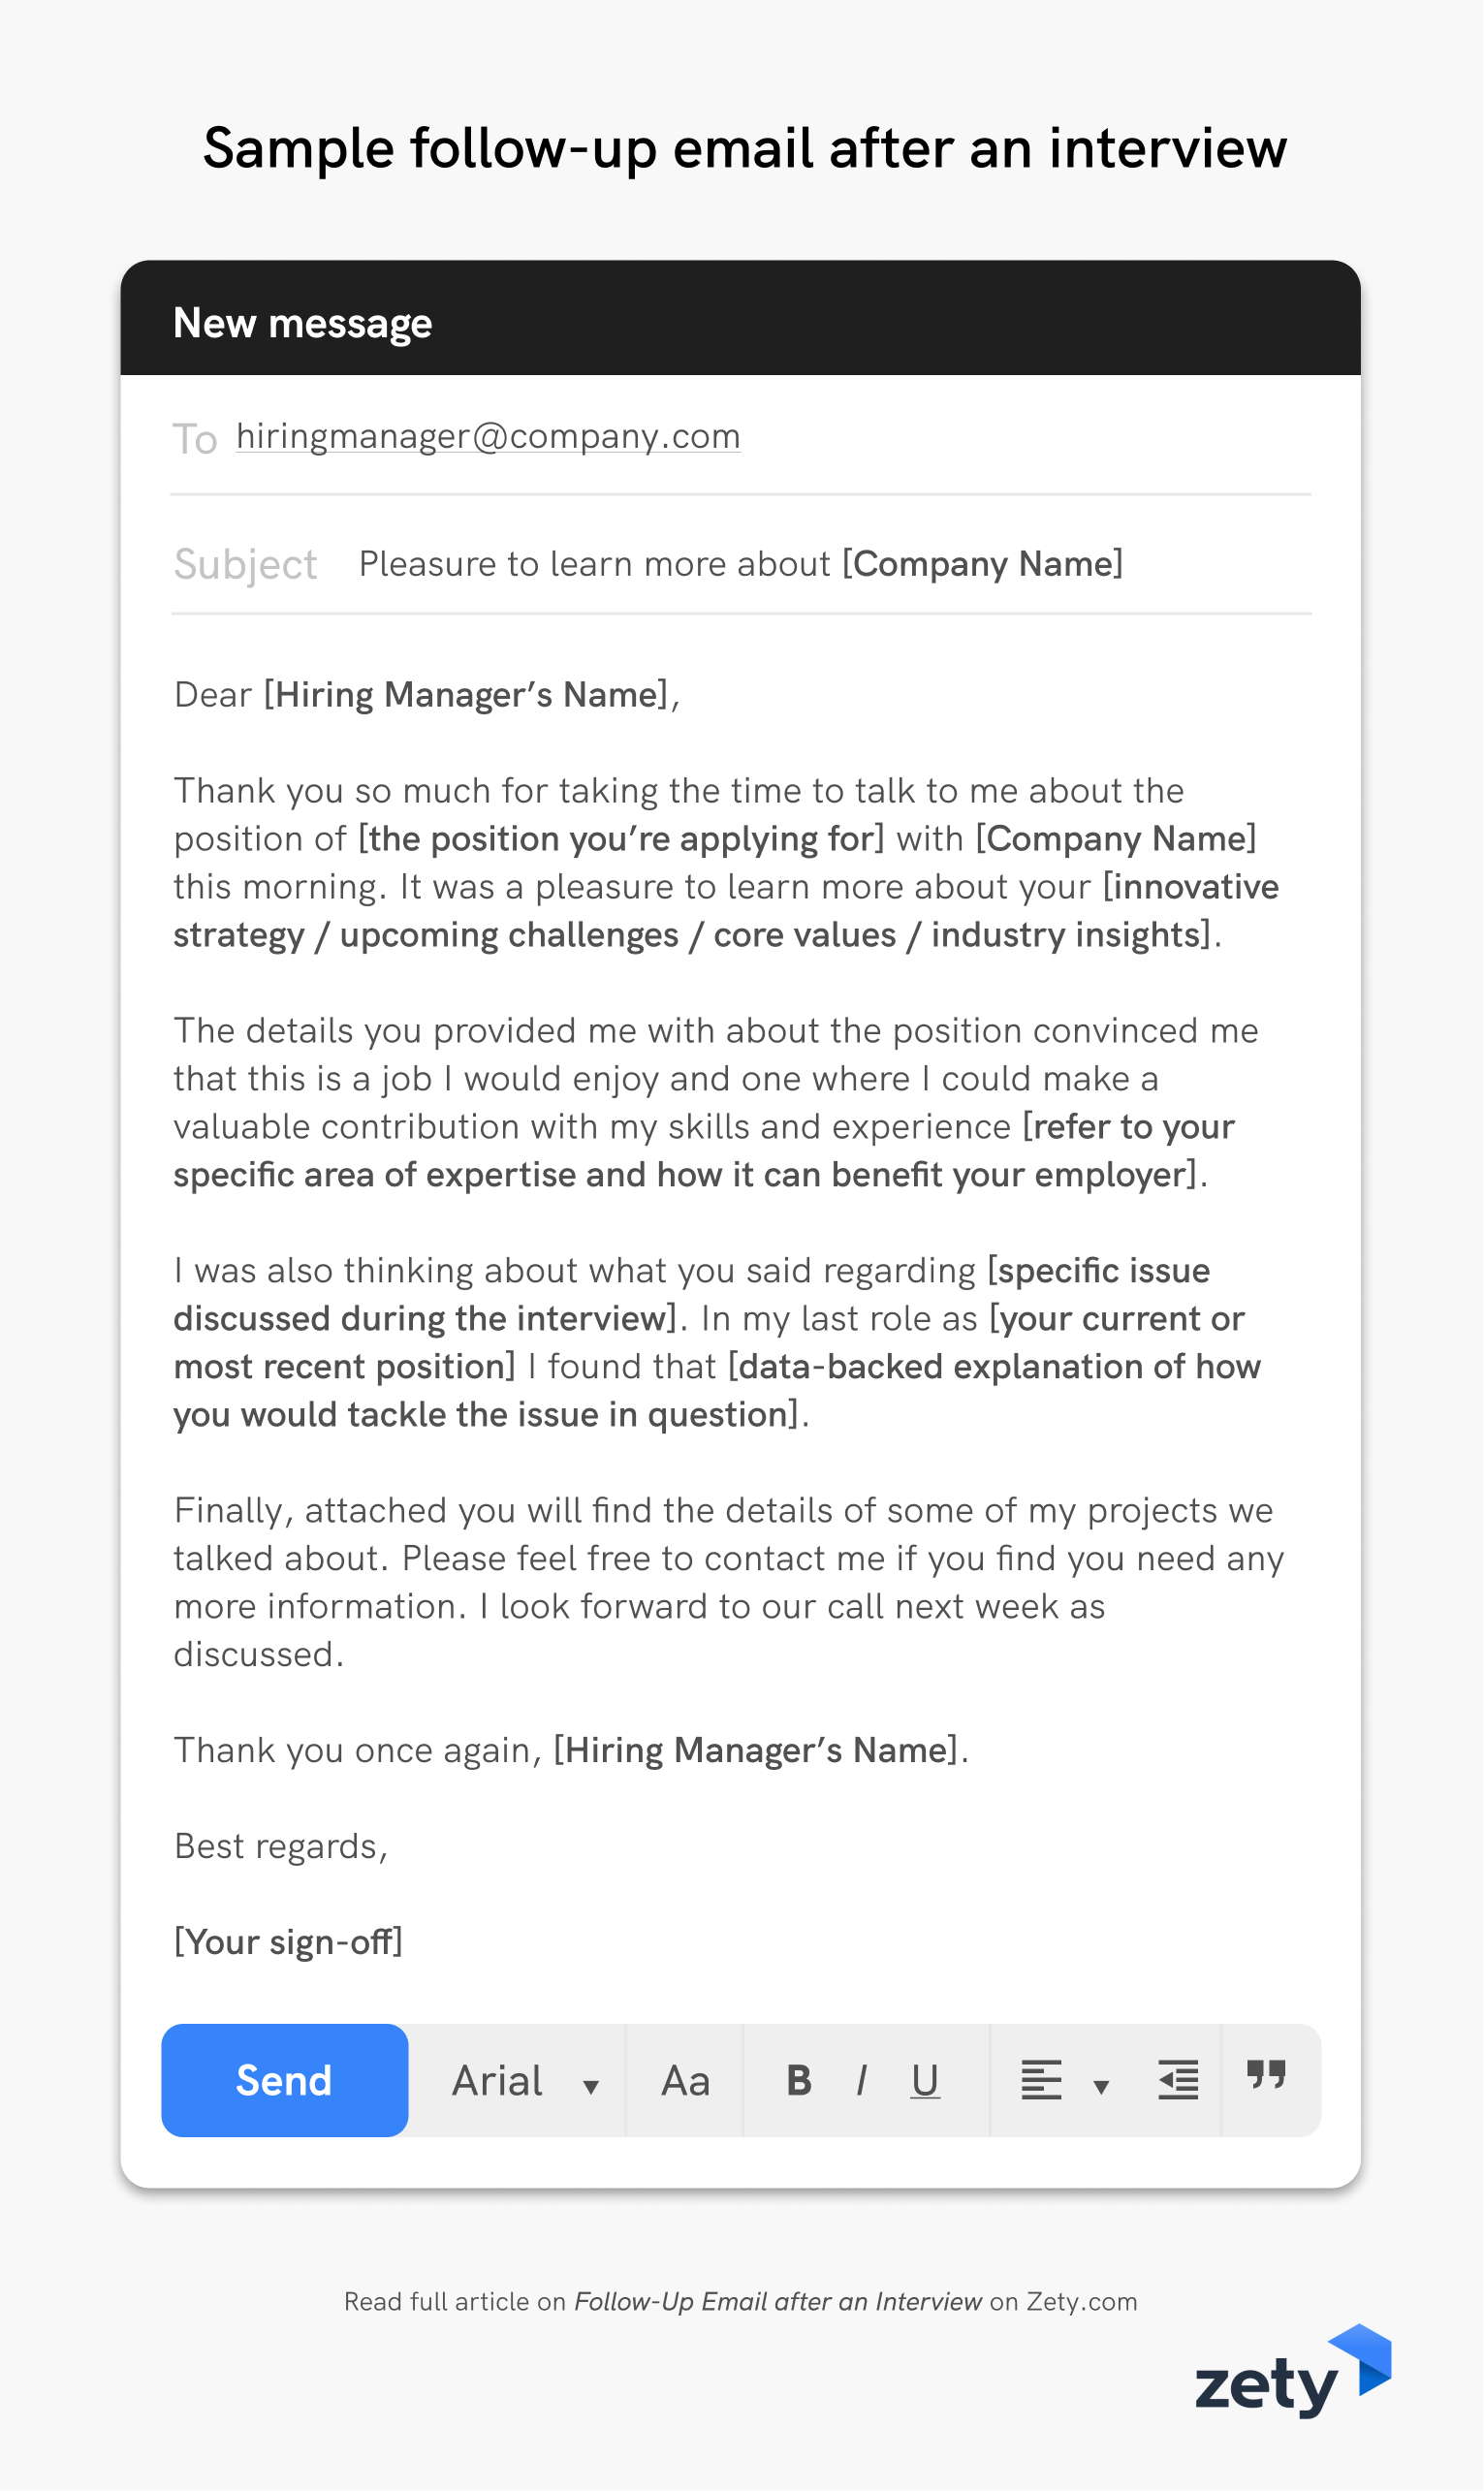 Follow-Up Email after an Interview: 18 Samples & Templates That Work